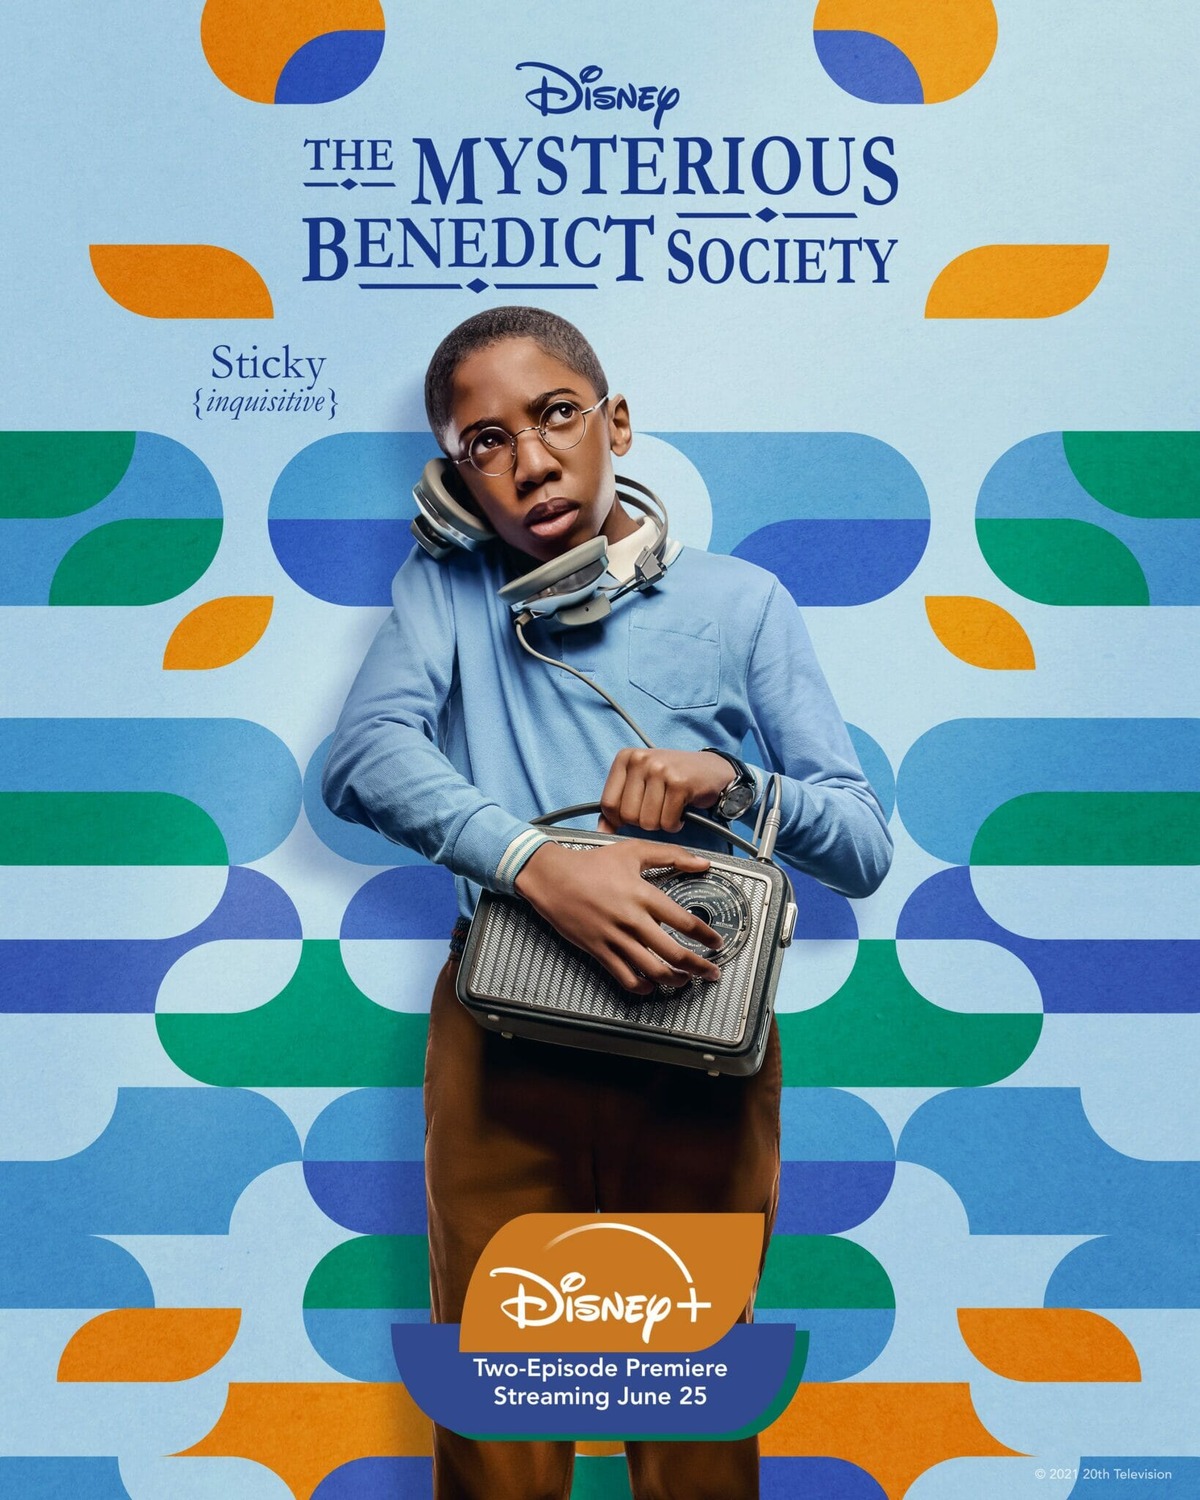 Extra Large TV Poster Image for The Mysterious Benedict Society (#8 of 11)